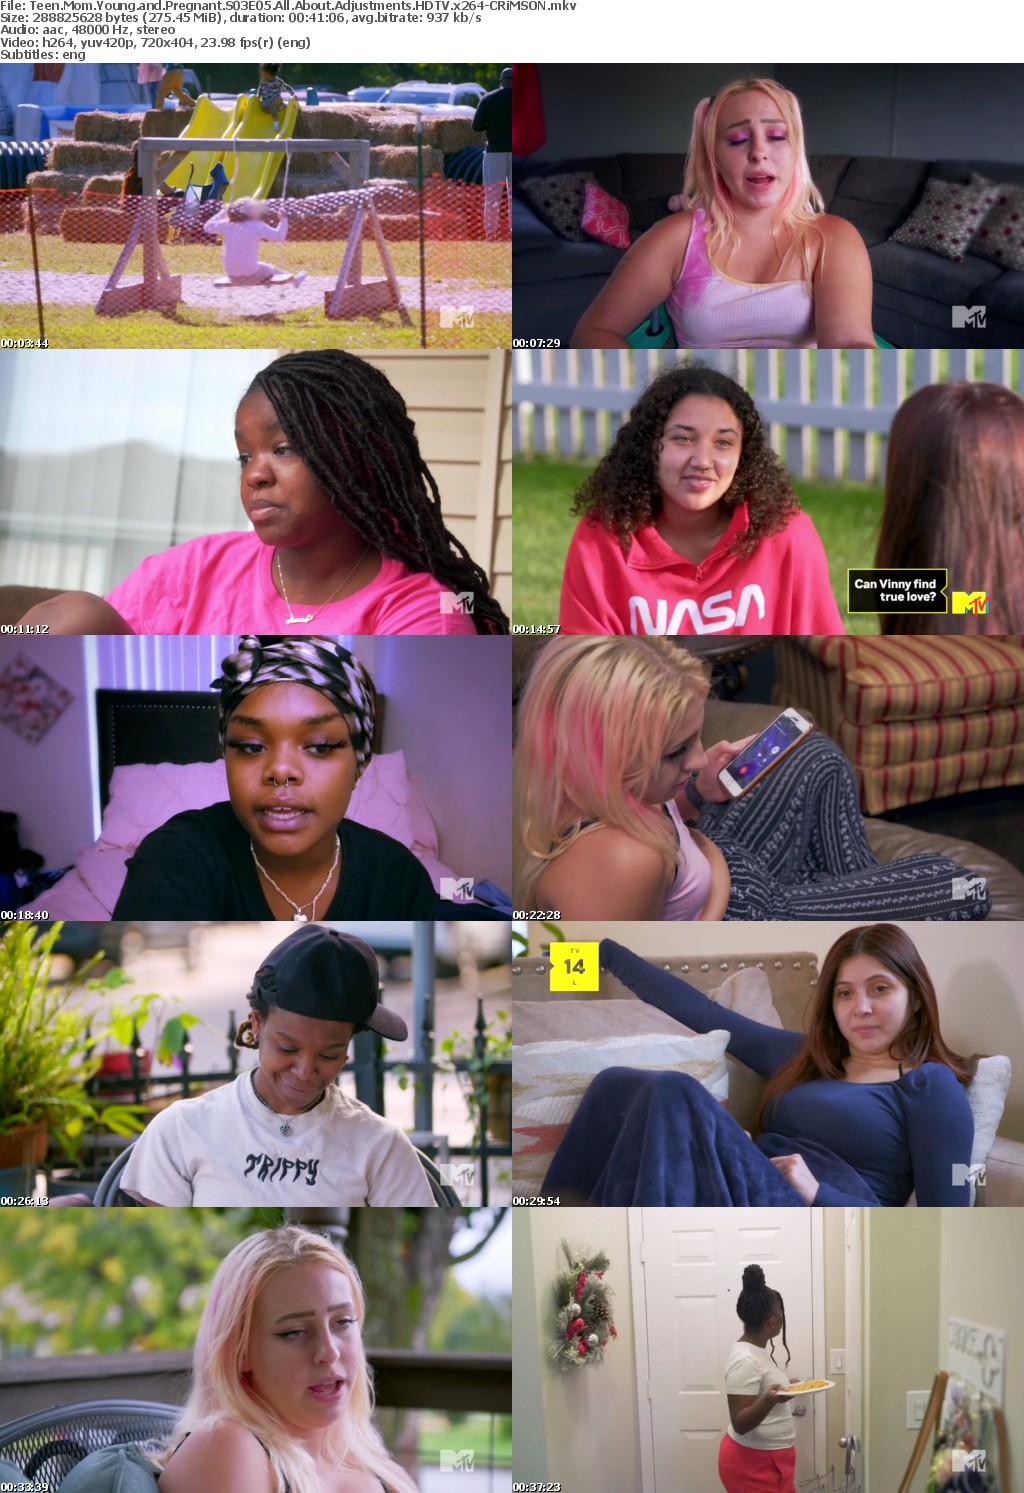 Teen Mom Young and Pregnant S03E05 All About Adjustments HDTV x264-CRiMSON